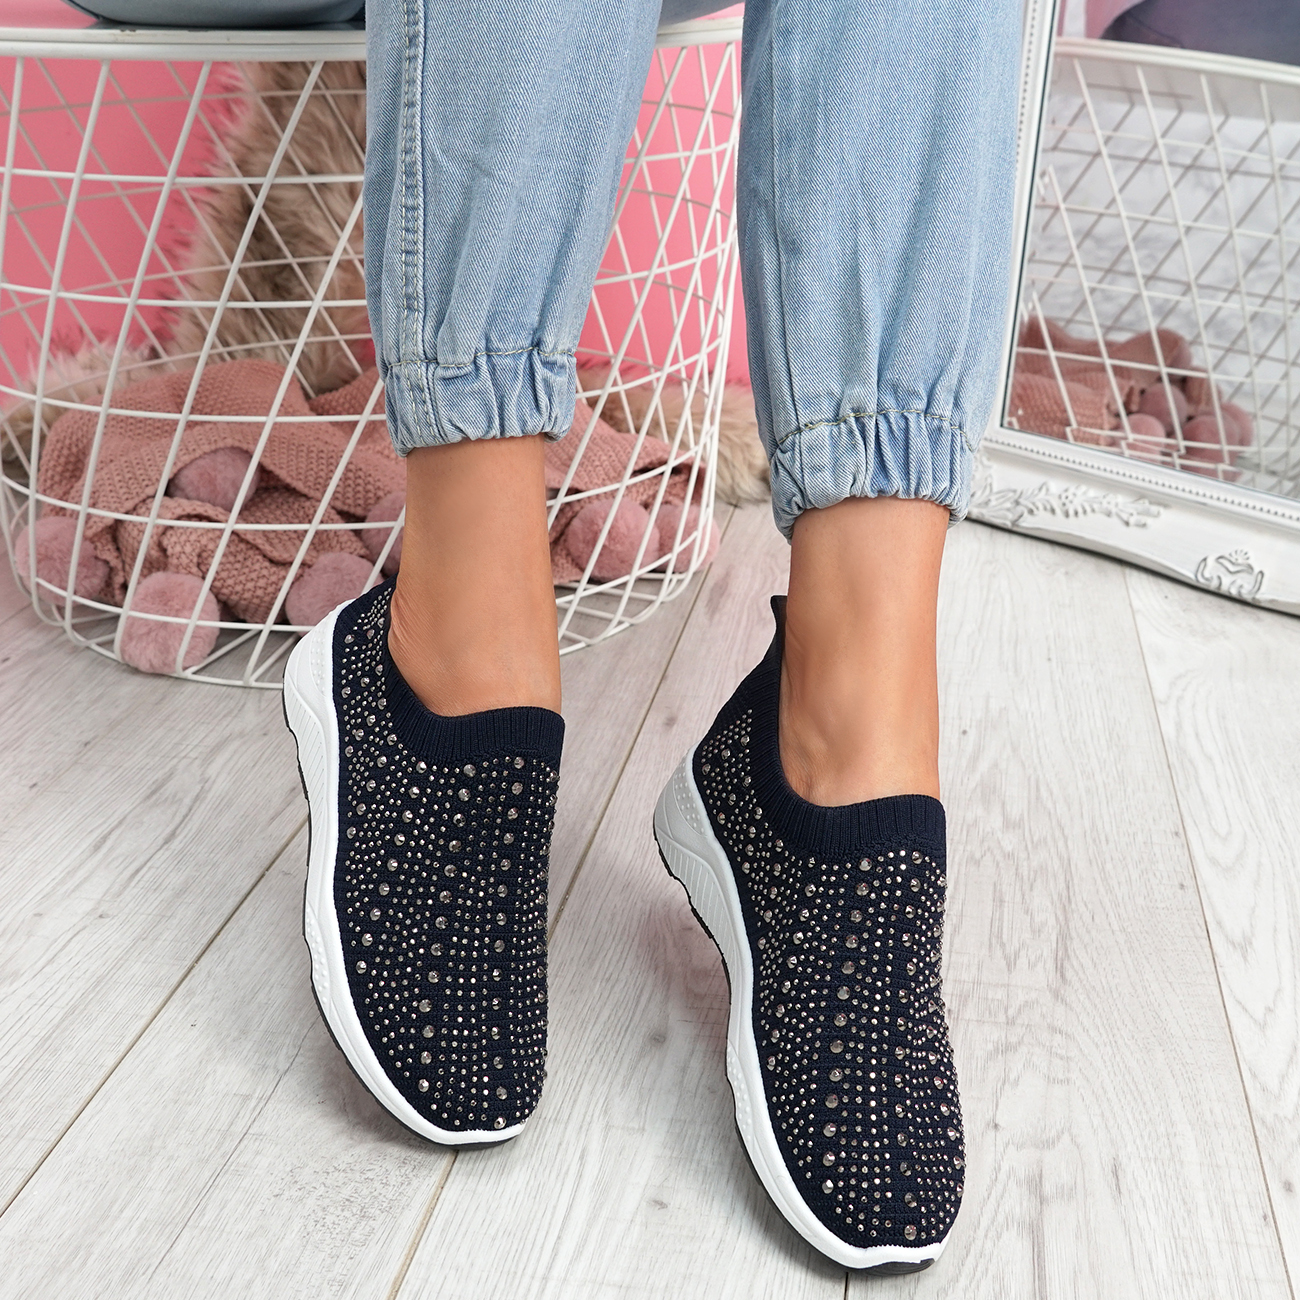 WOMENS LADIES SLIP ON SOCK SNEAKERS DIAMANTE STUDDED PARTY TRAINERS ...